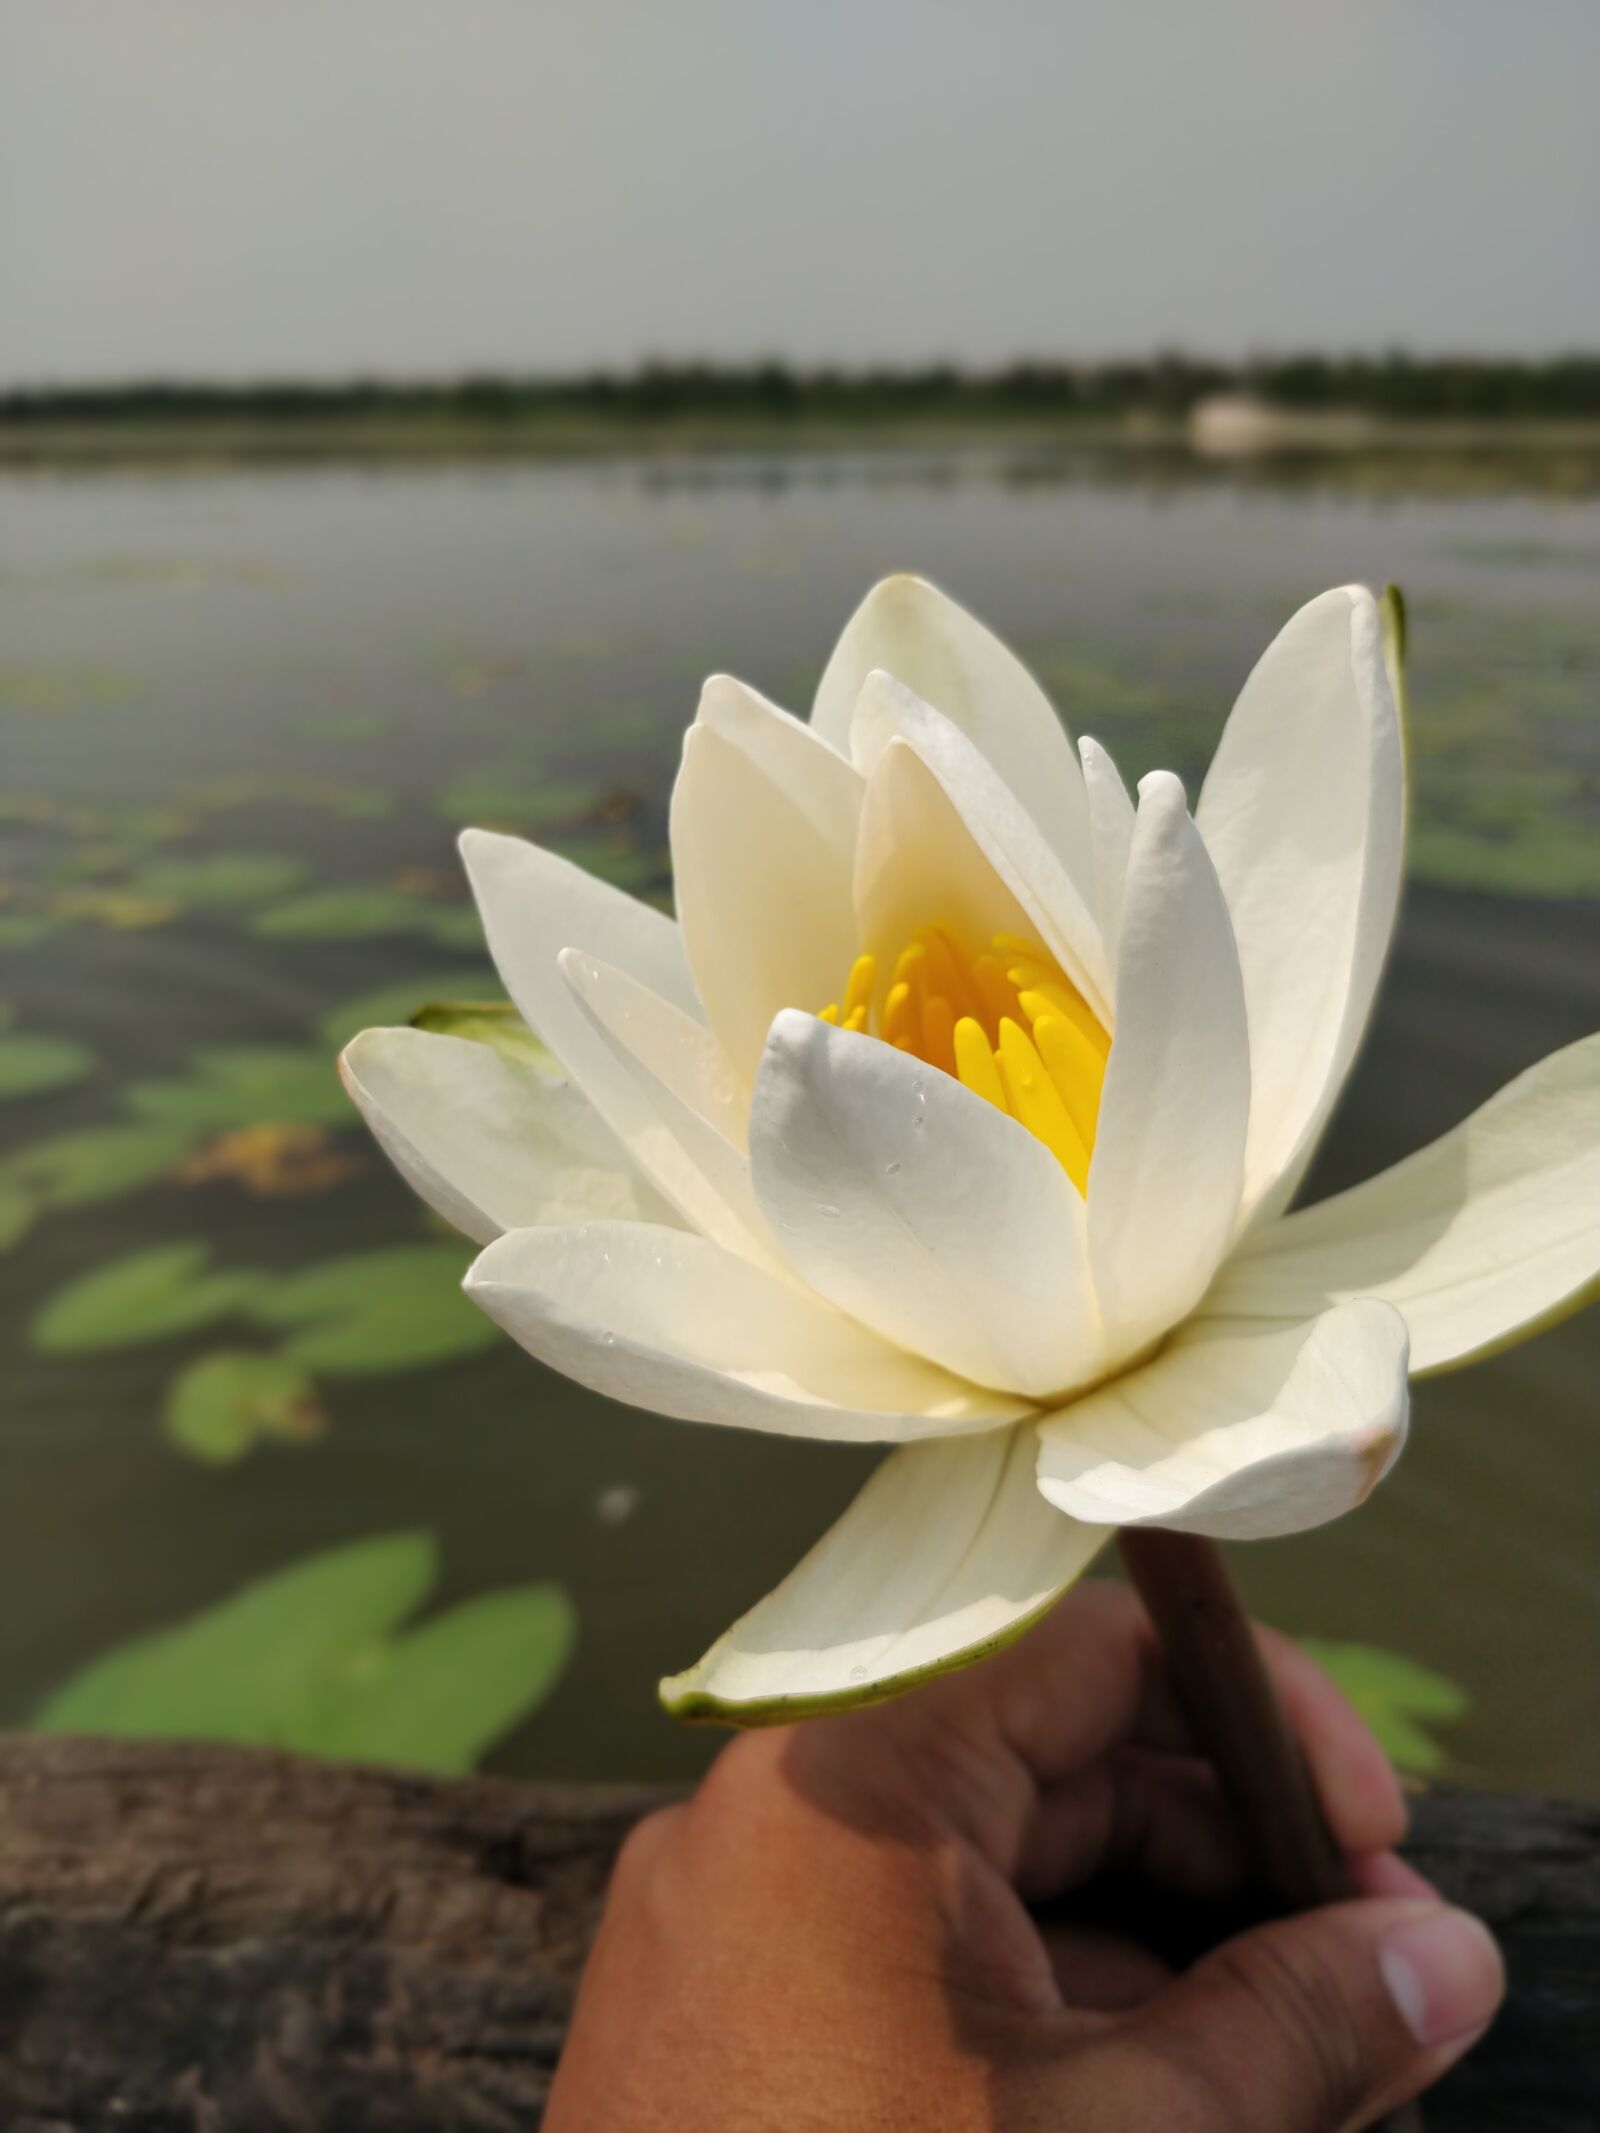 OnePlus 5T sample photo. Water, nature, flower photography